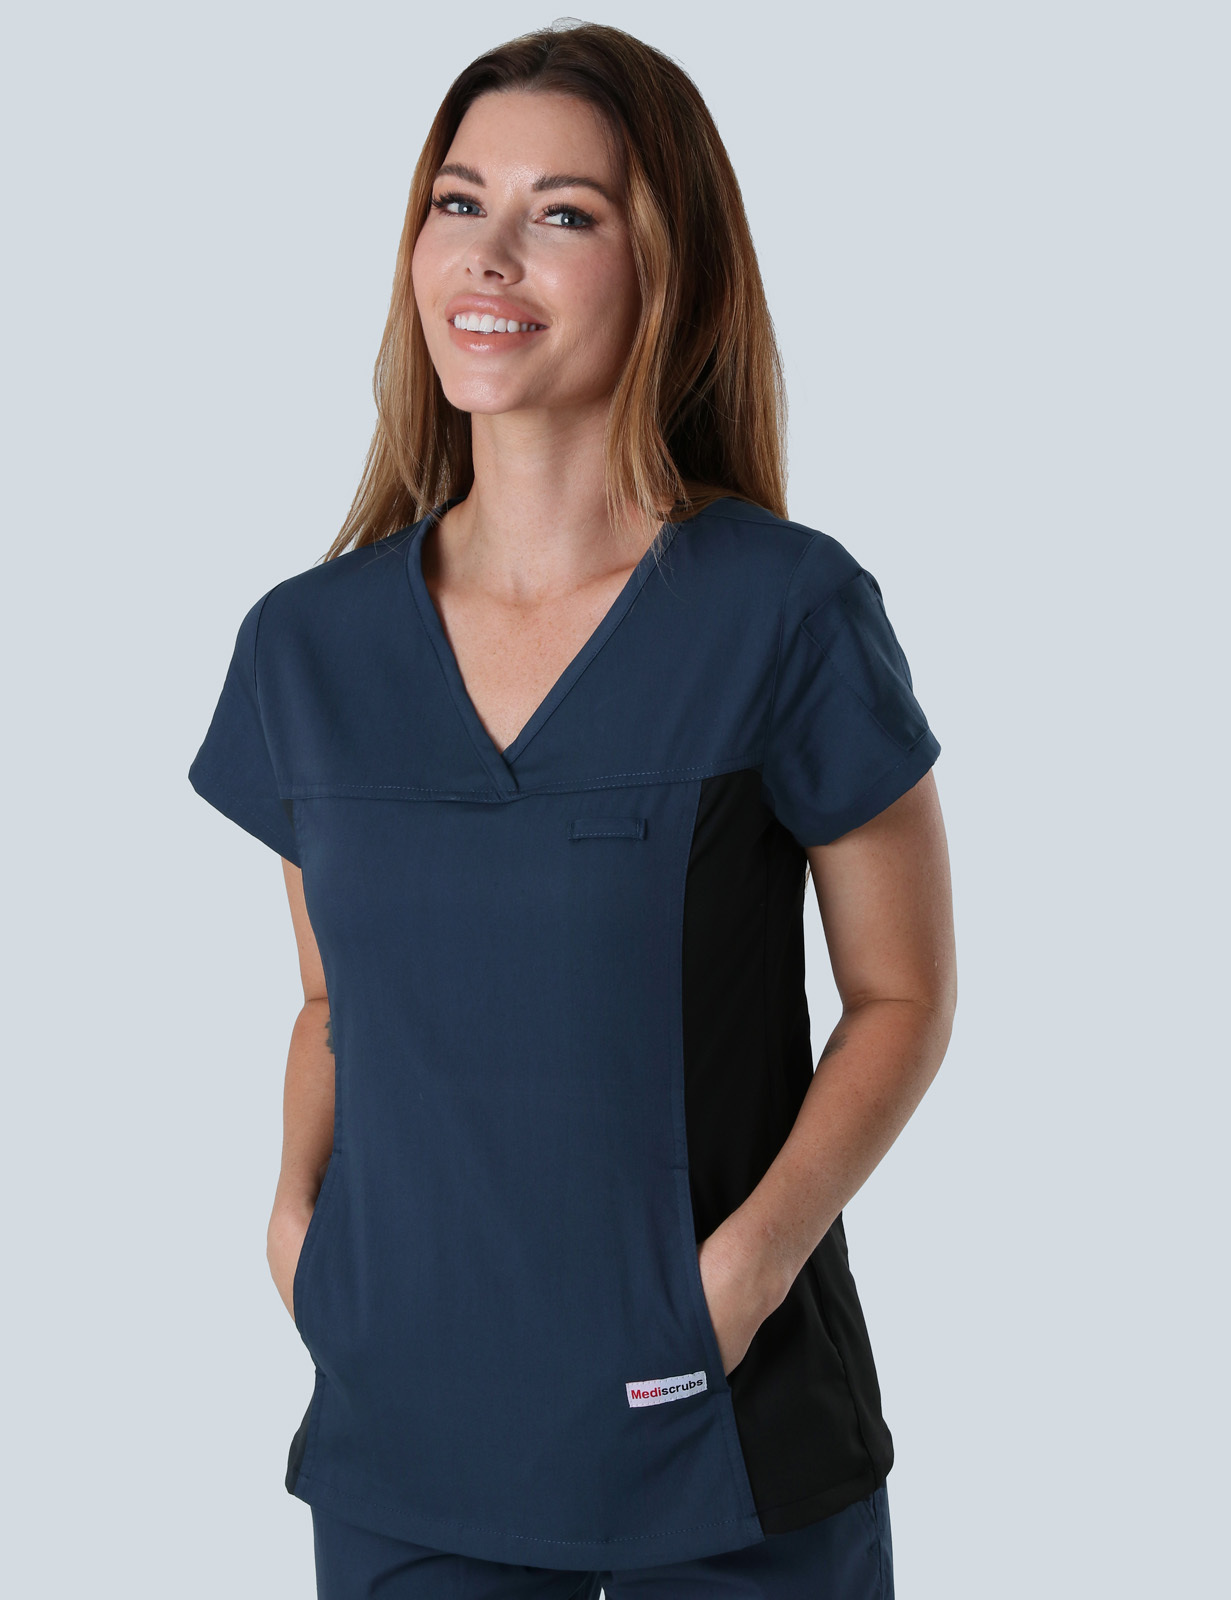 RBWH - 7BN Neurology and Stroke NUM (Women's Fit Spandex Scrub Top and Cargo Pants in Navy incl logos)